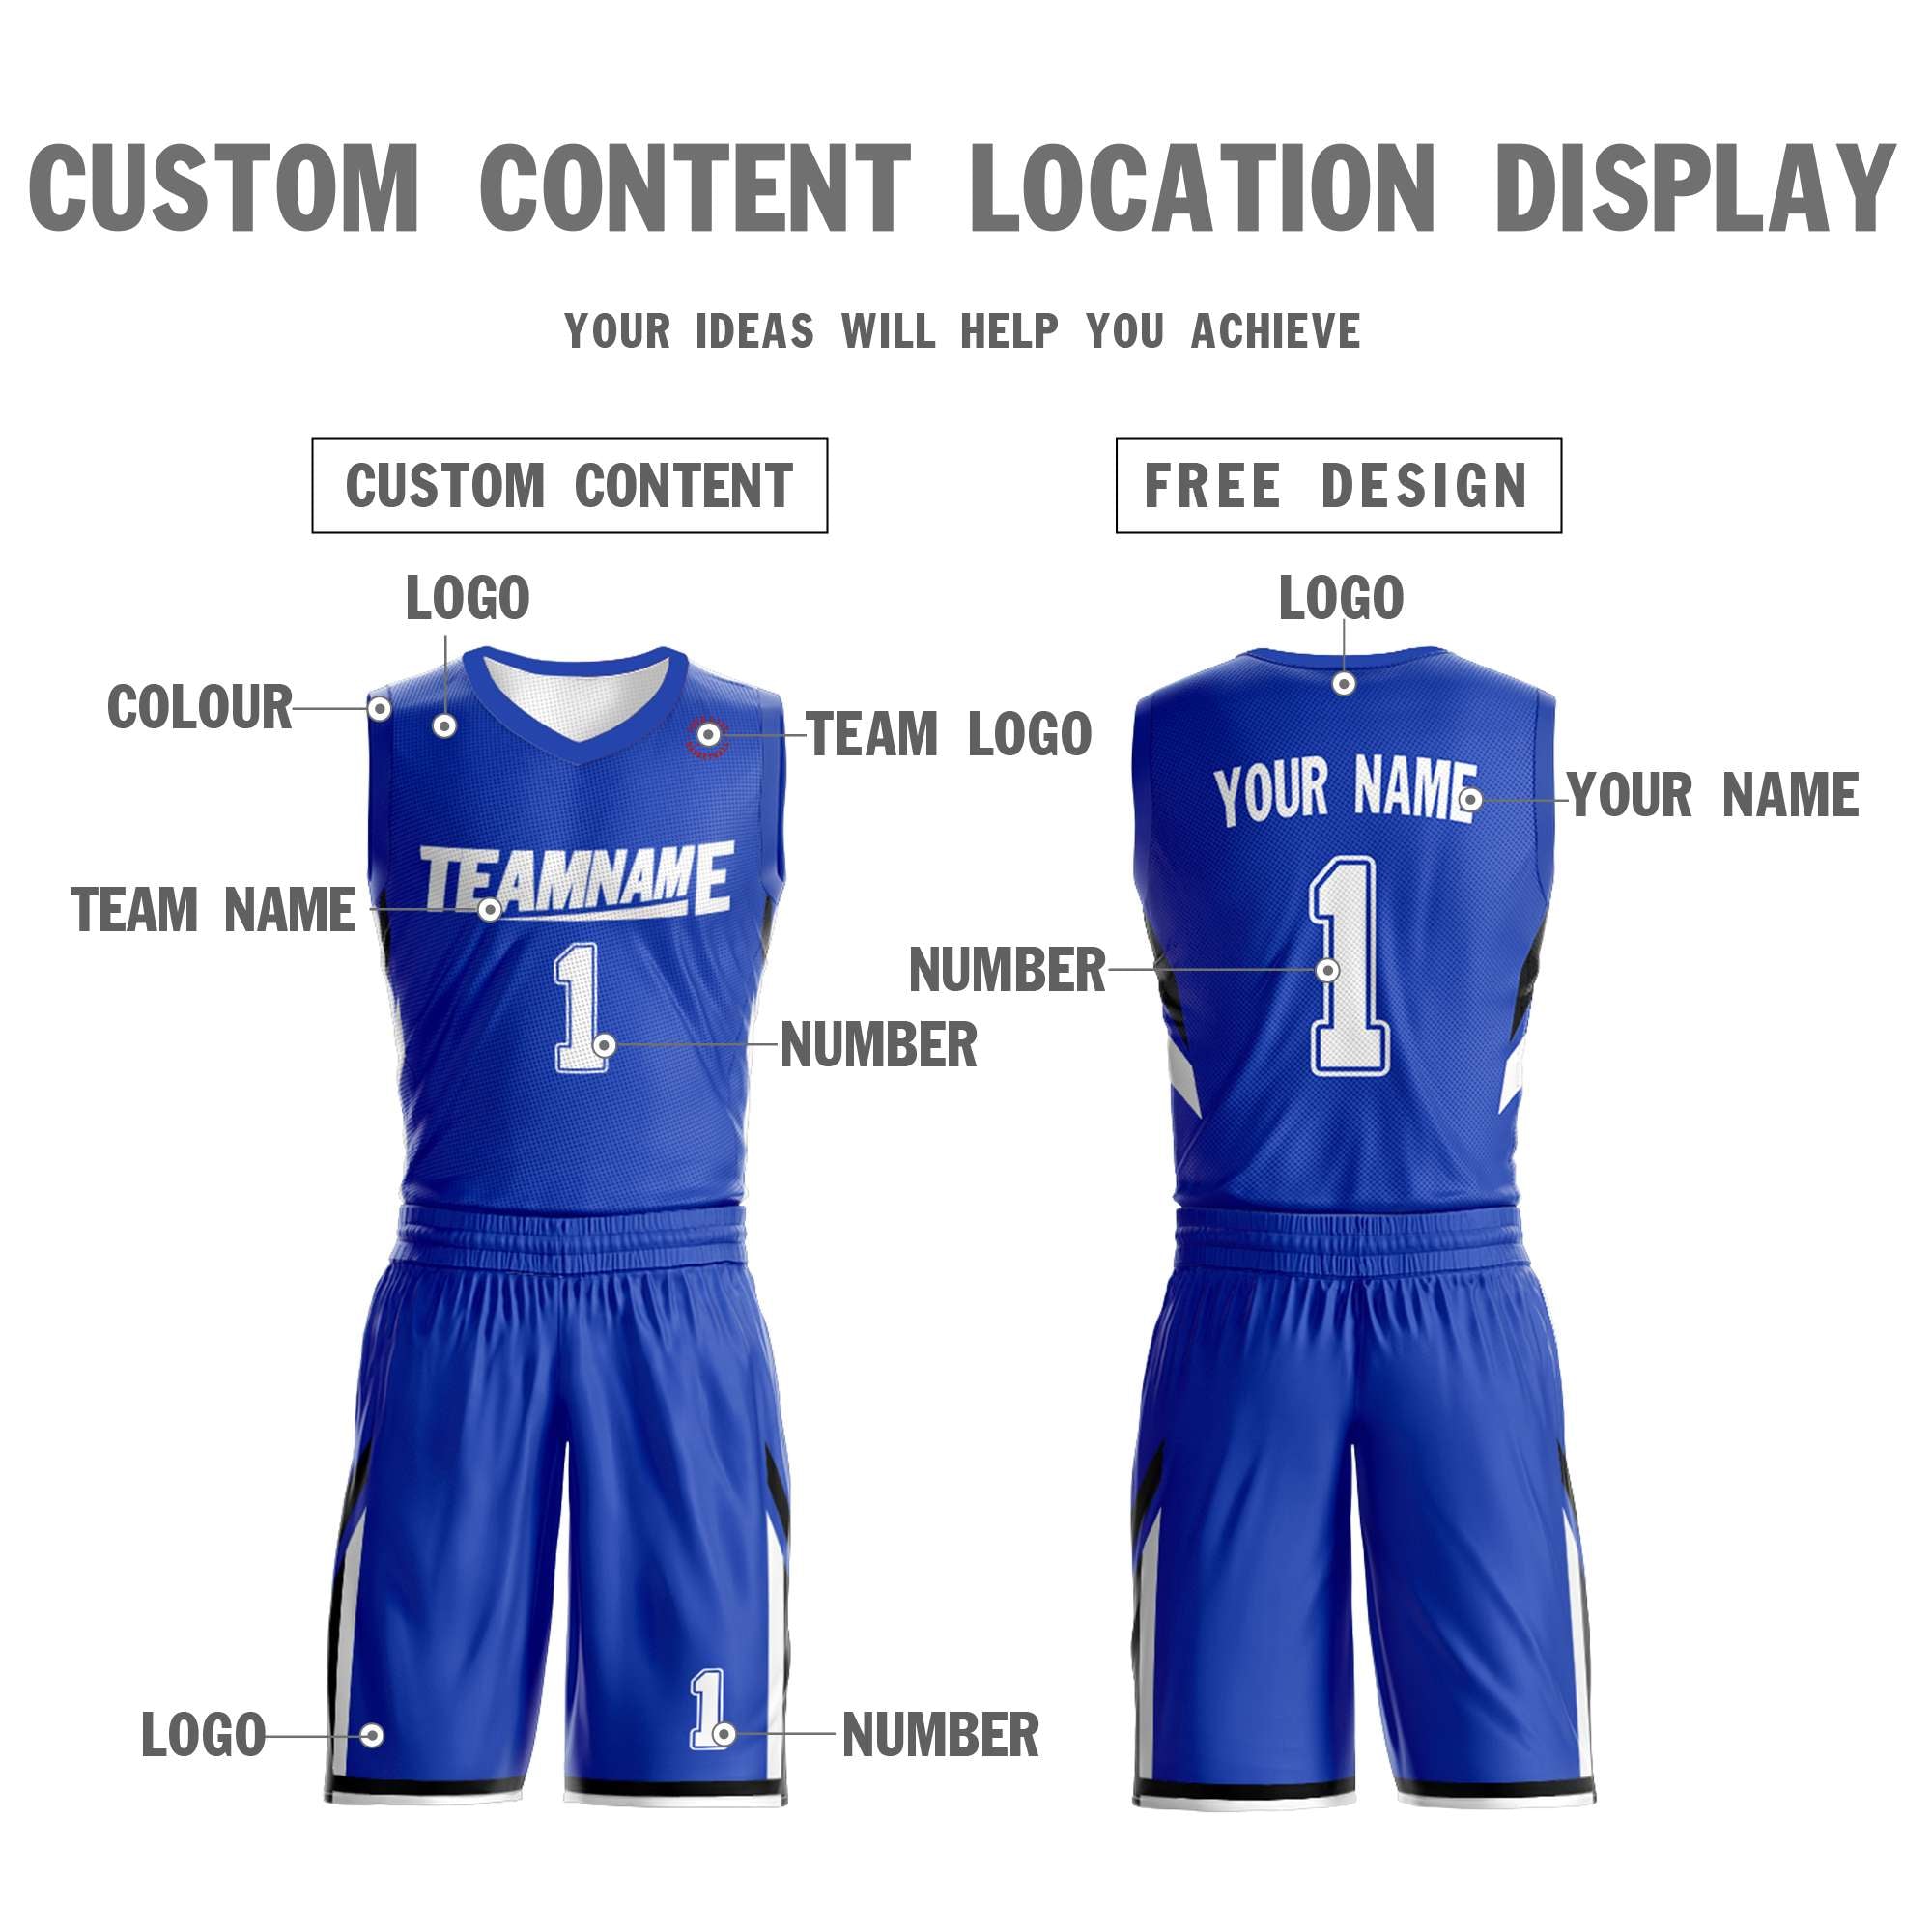 royal and white reversible basketball jersey content location display for school team